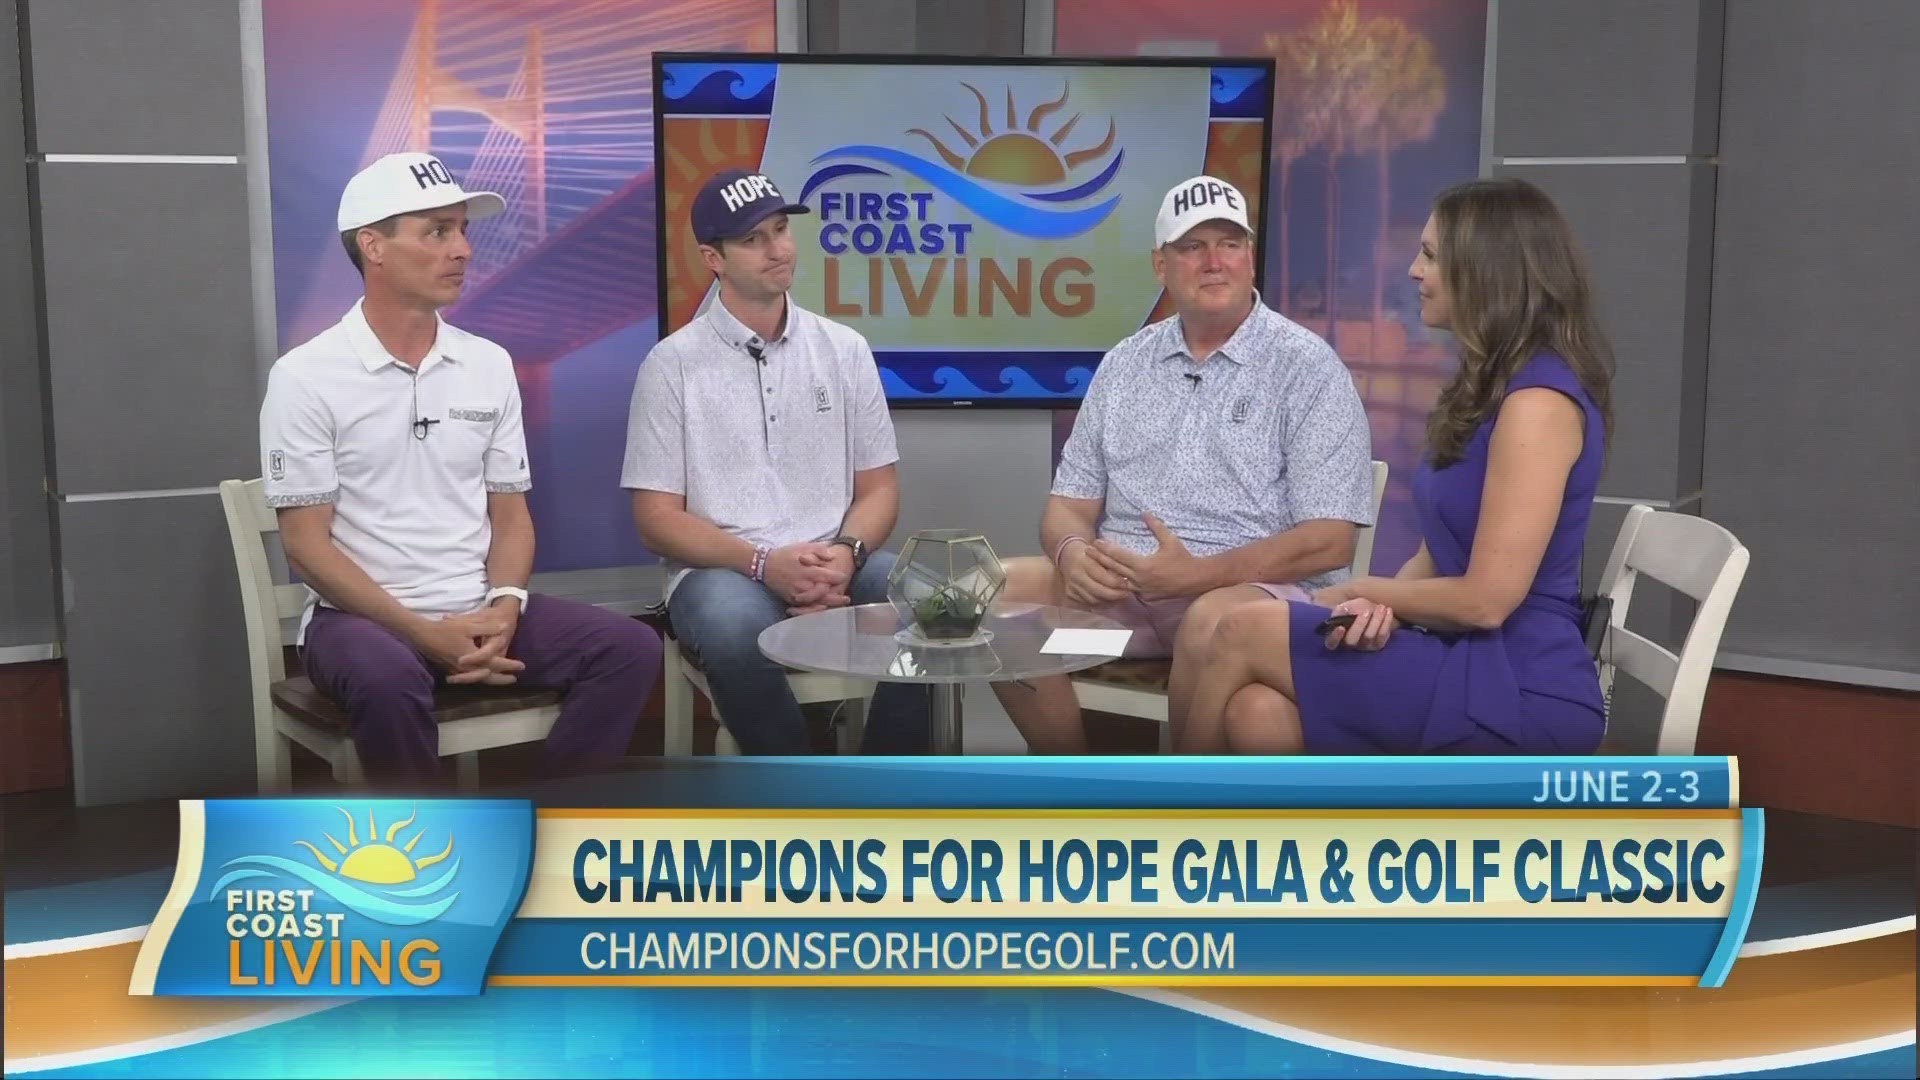 Champions for Hope brings out the champions in our community by helping families living with disabilities through the JT Townsend Foundation.